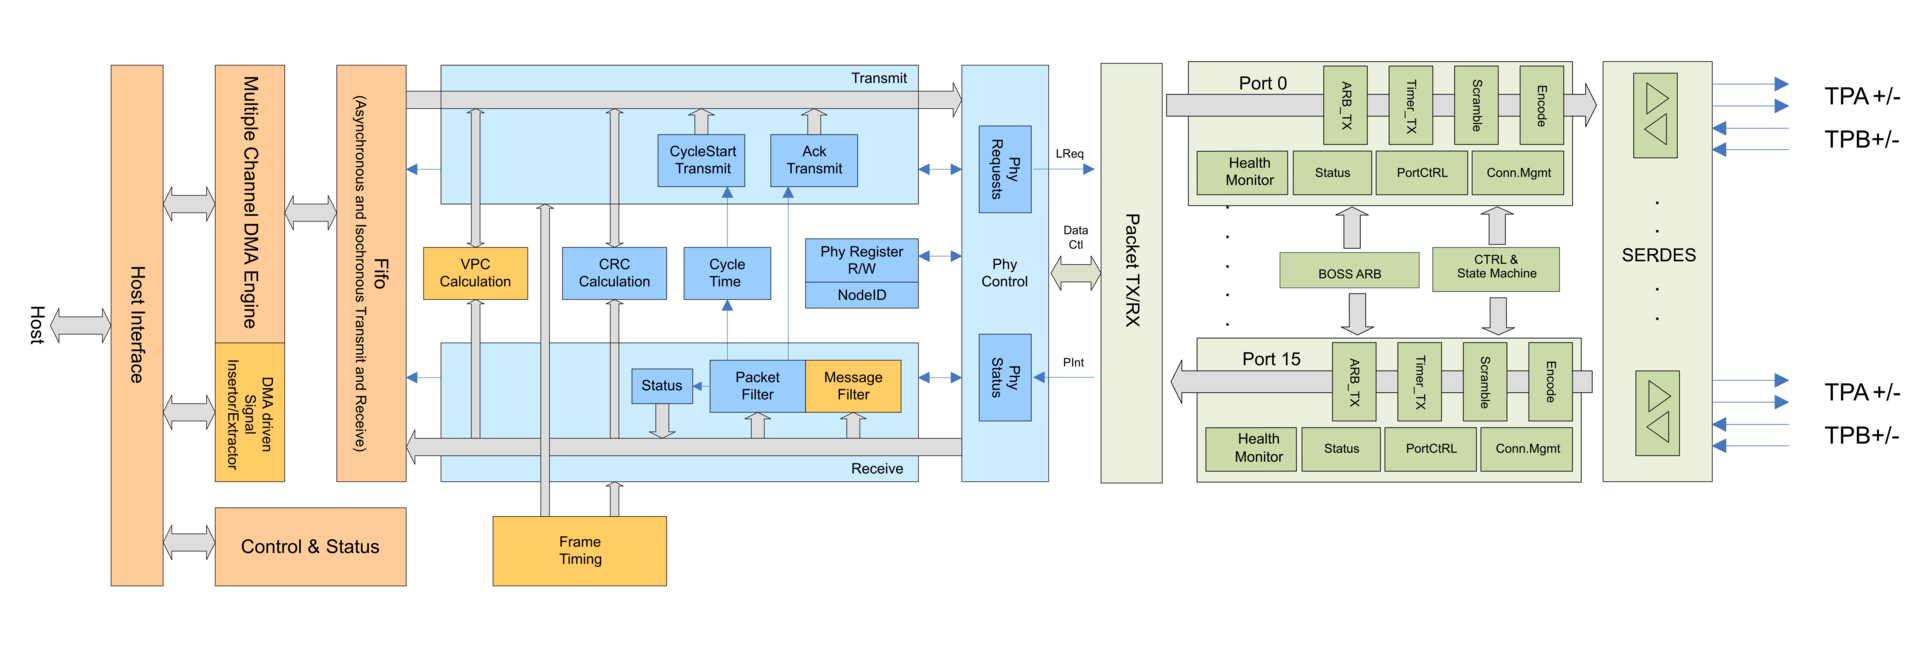 1394 and AS5643 IP Core solutions - AS5643 FireCore Extended Block Diagram